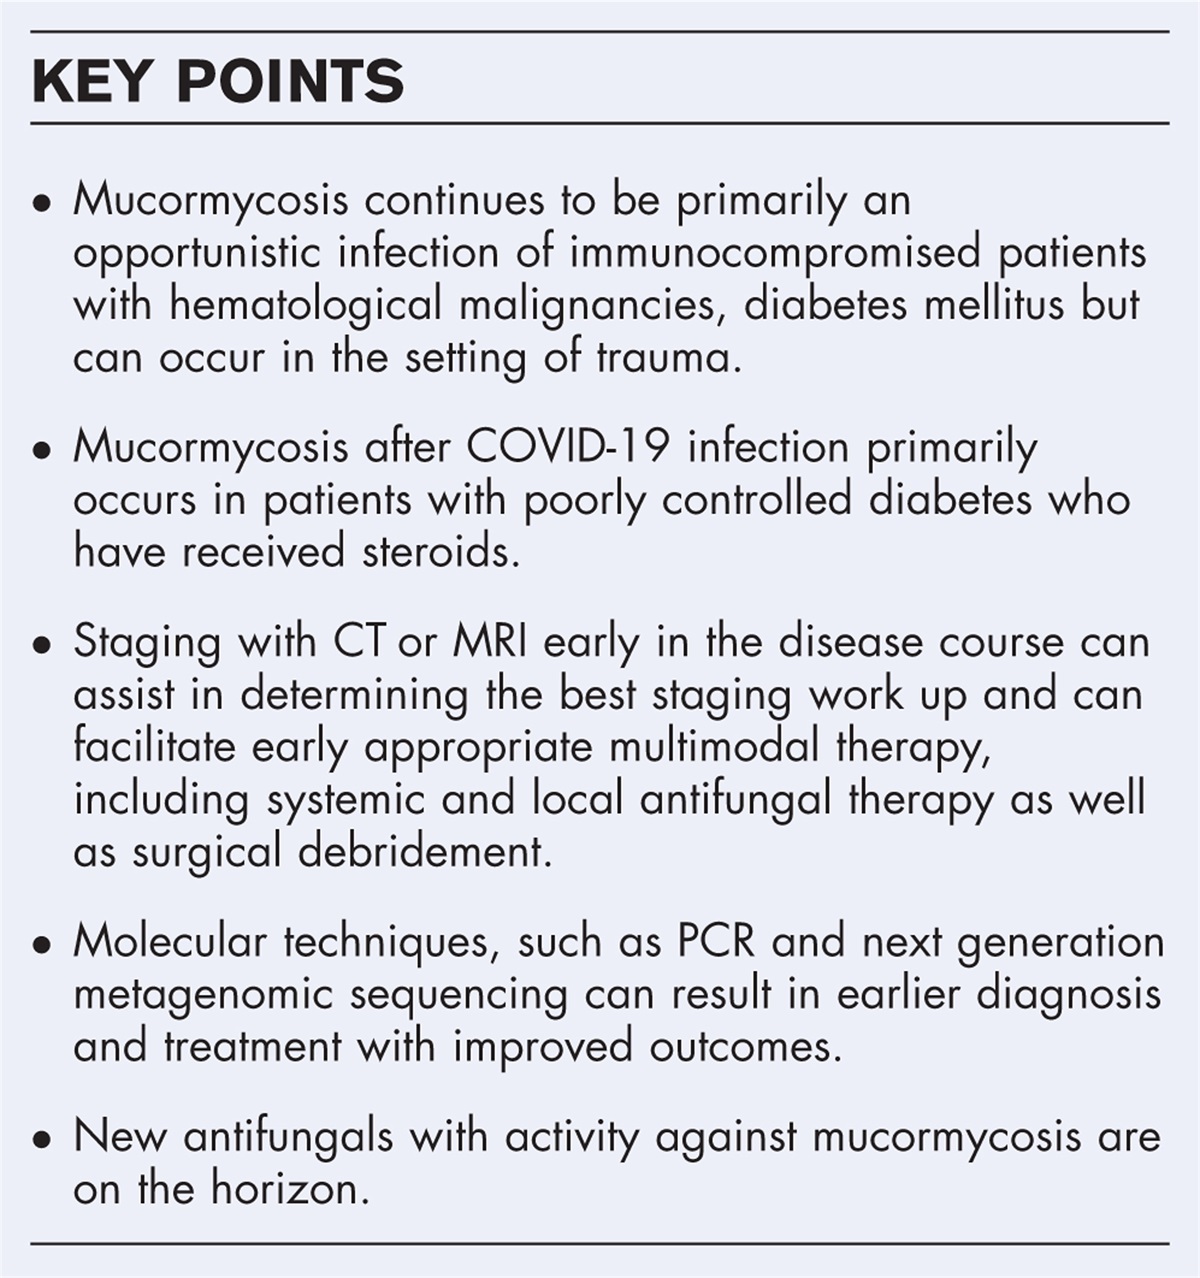 Mucormycosis: update on clinical presentation, diagnosis, and treatment